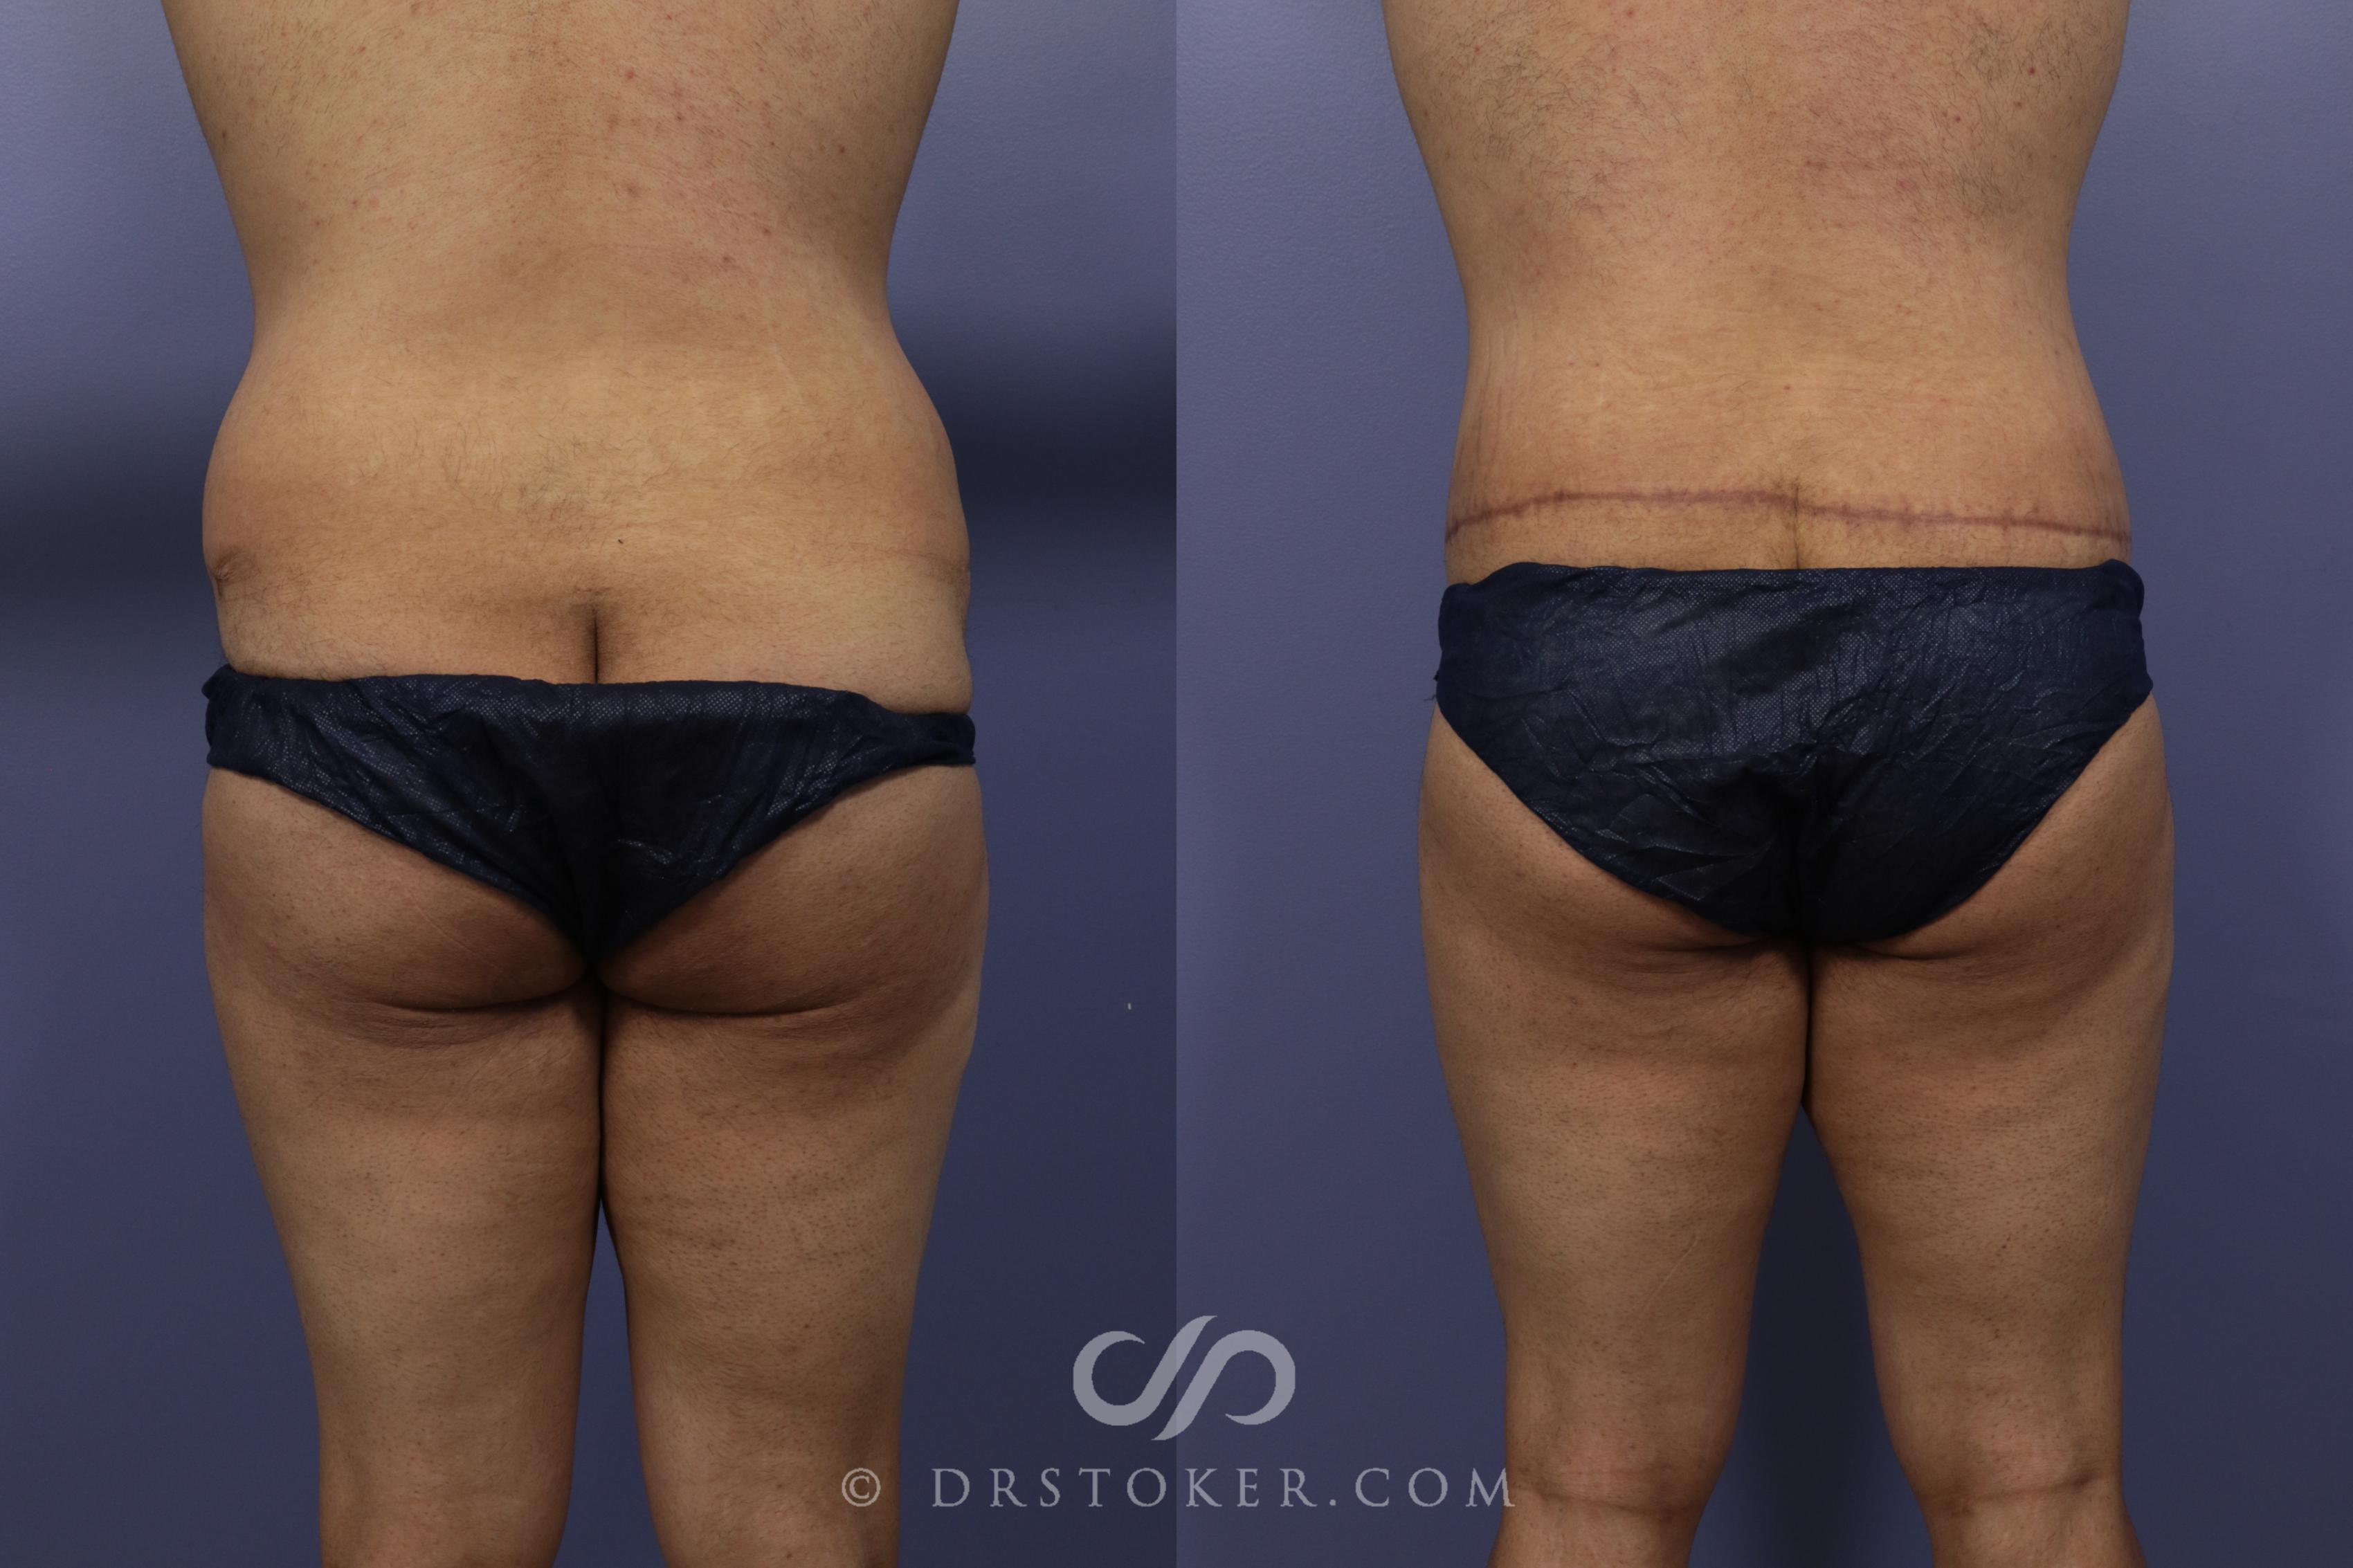 Body Lift Before and After Pictures Case 1003, Los Angeles, CA